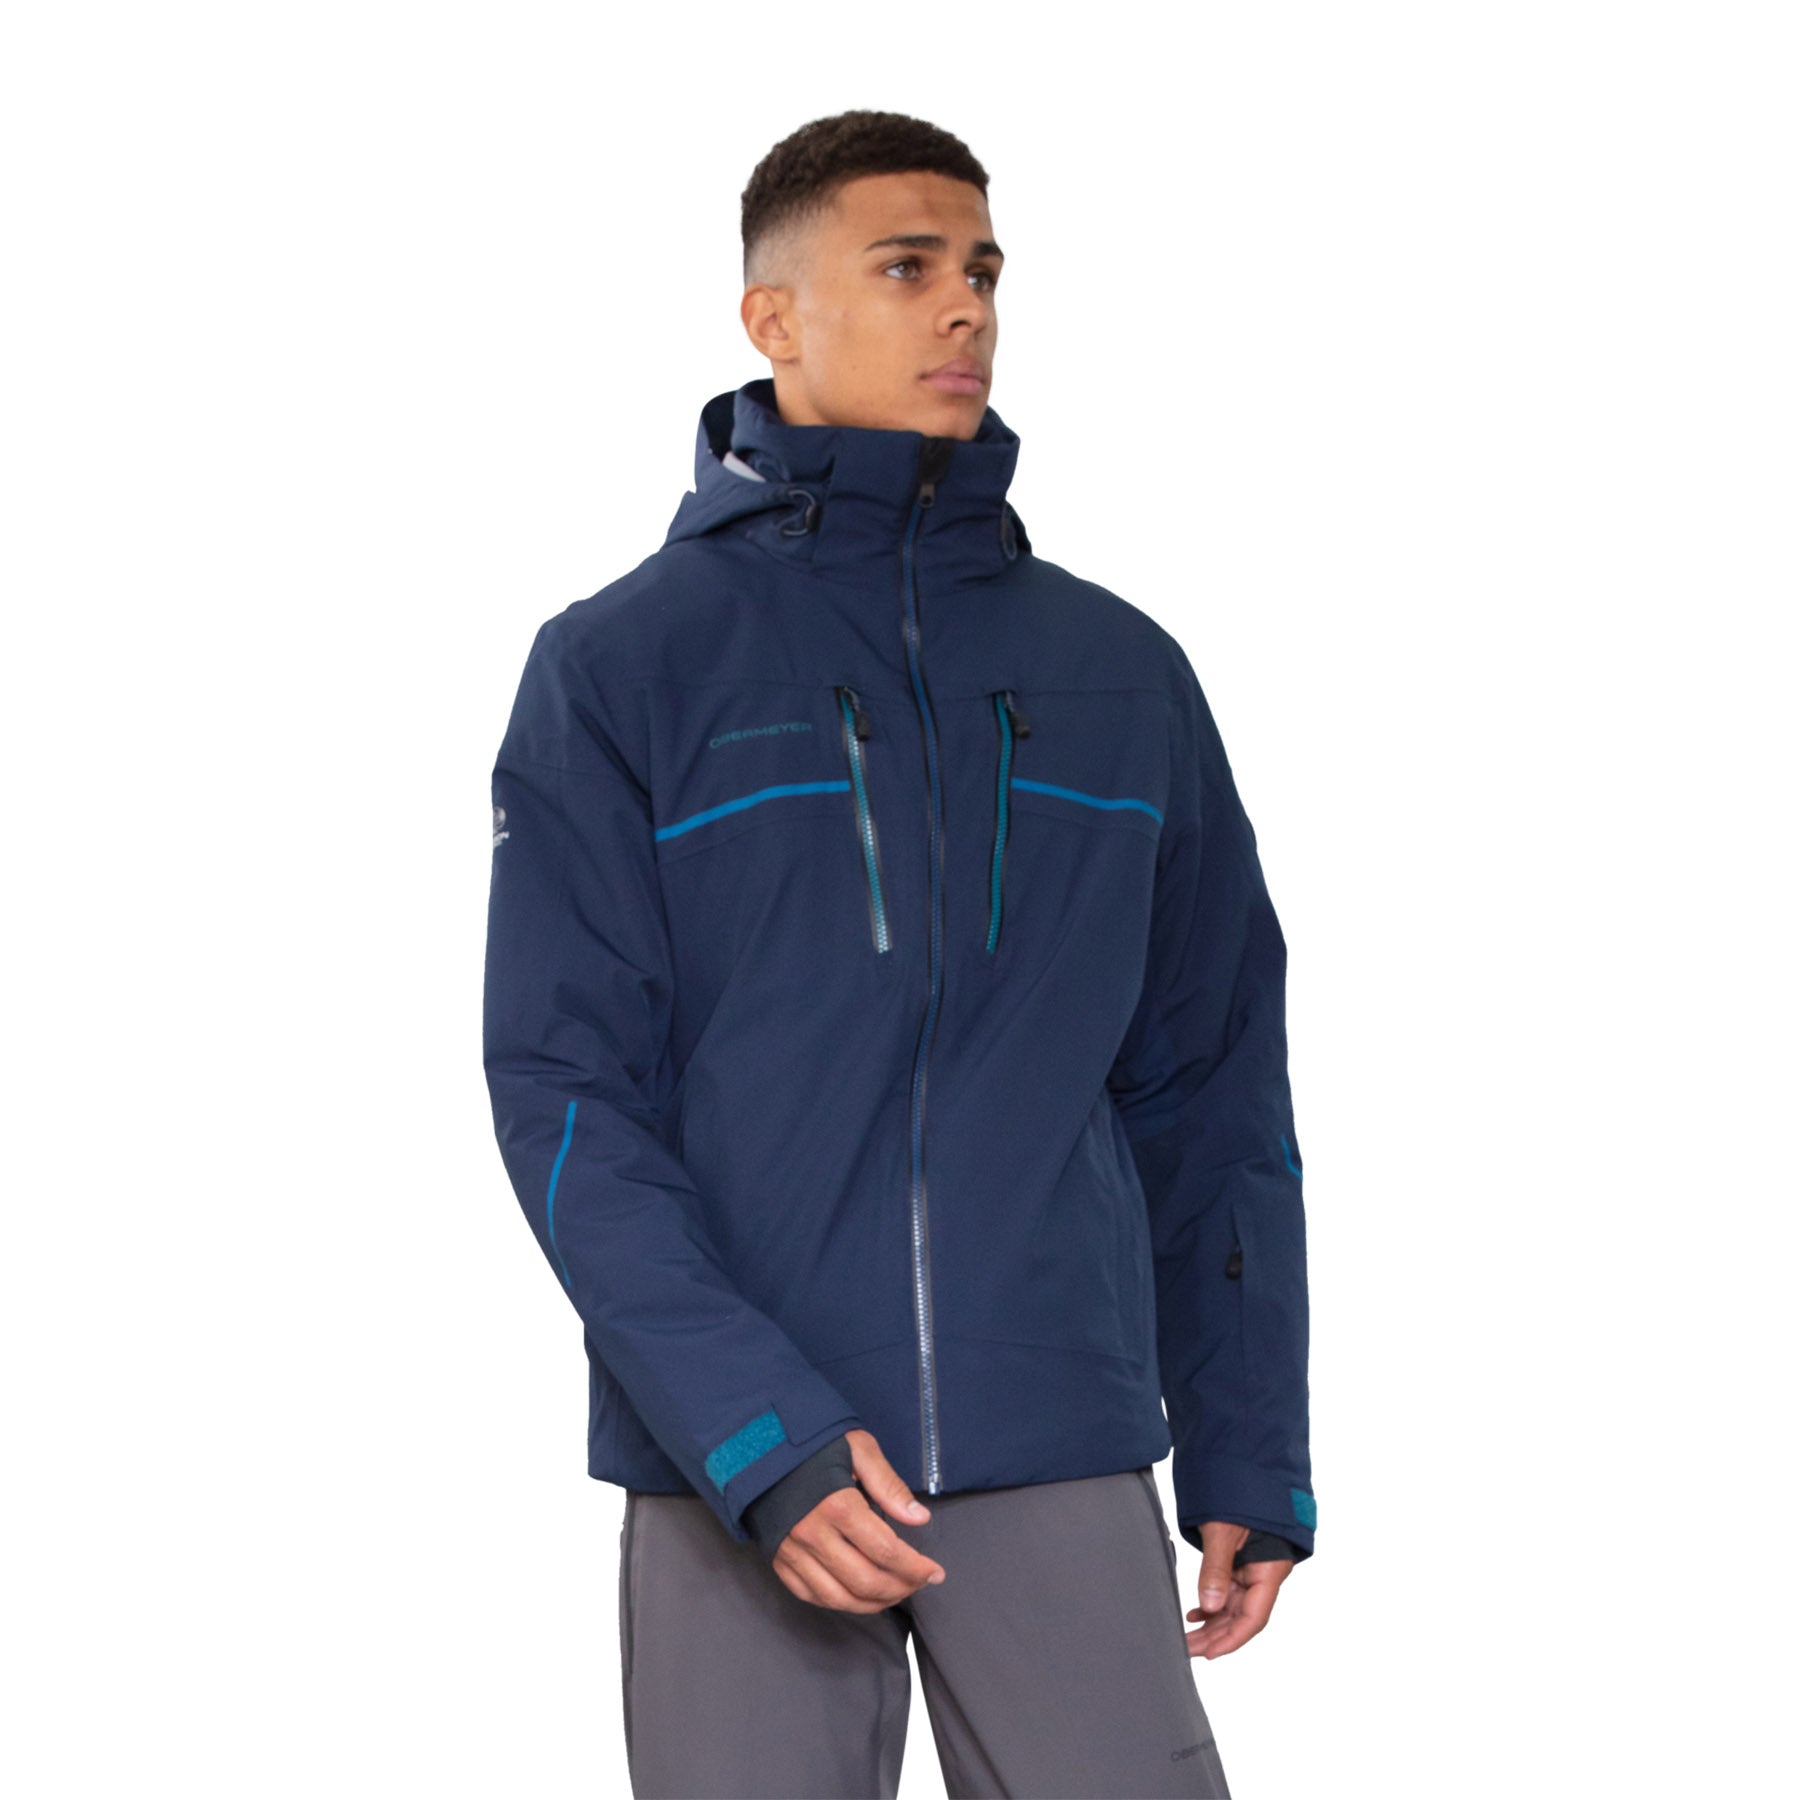 Hero image featuring a male model wearing the Obermeyer Charger jacket in admiral blue with light grey ski pants.